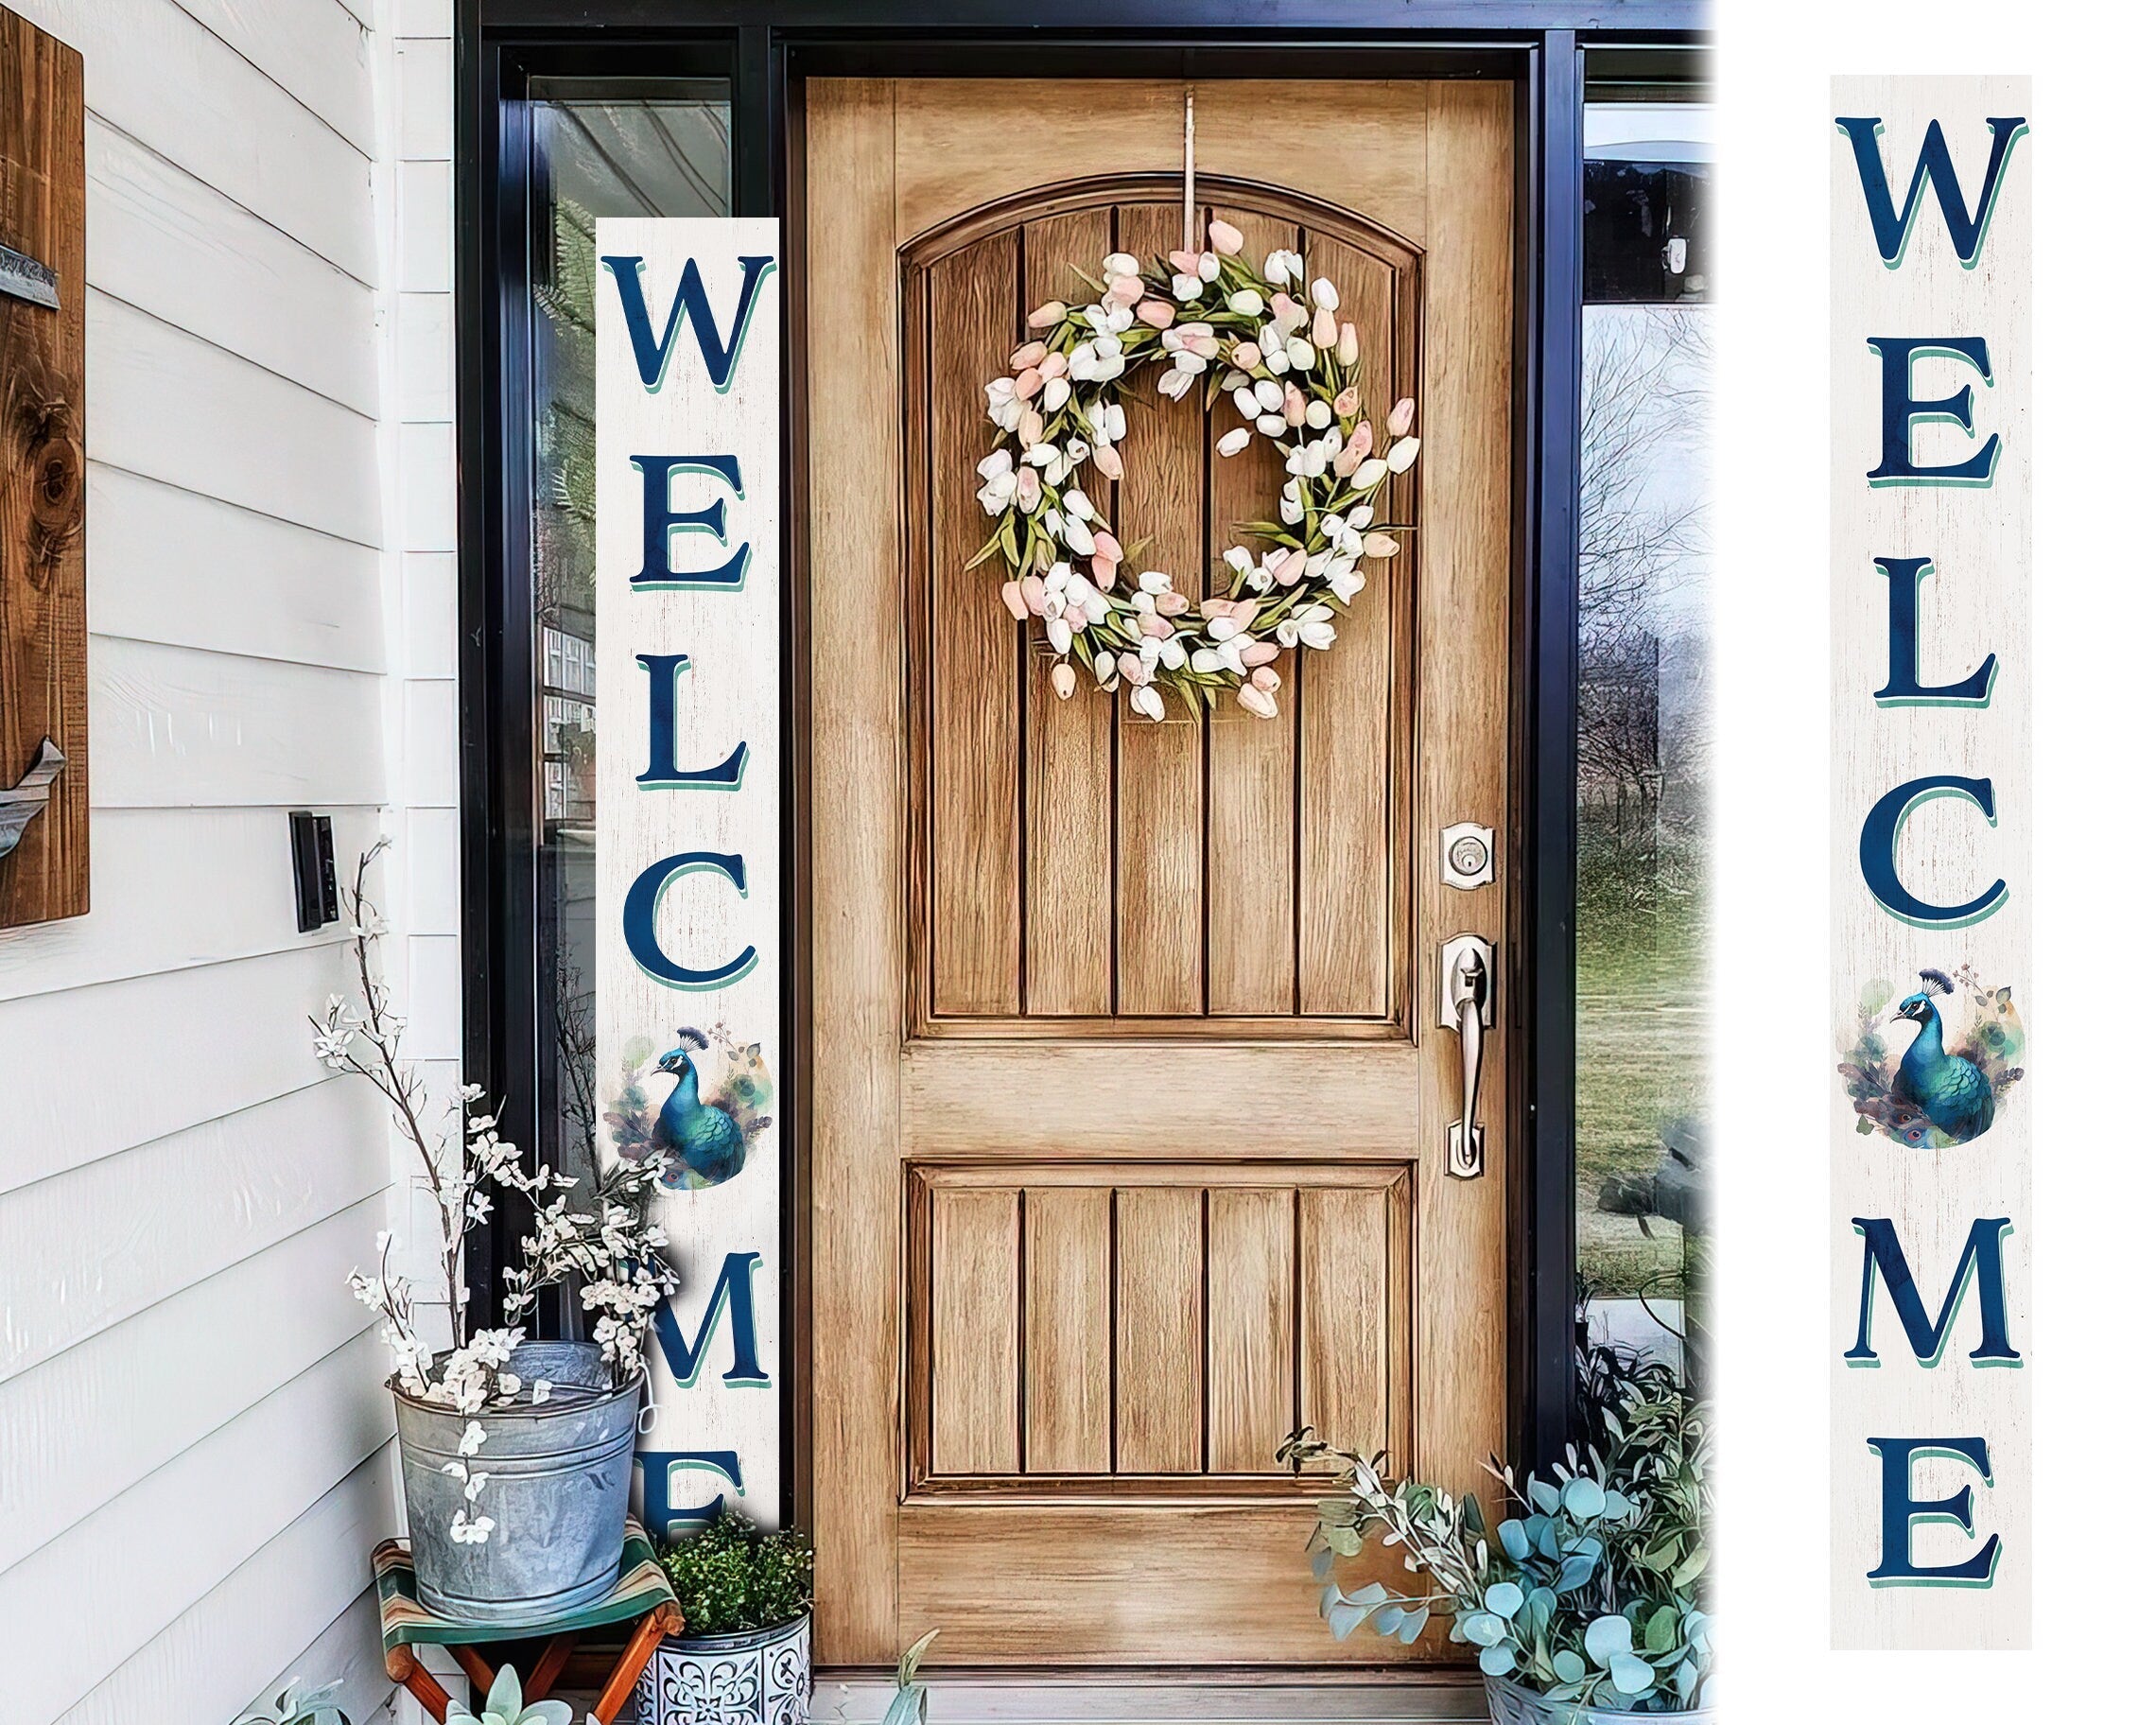 72in-Tall-Wooden-Welcome-Porch-Sign-with-Watercolor-Peacock-Pattern-Elegant-Outdoor-Decoration-